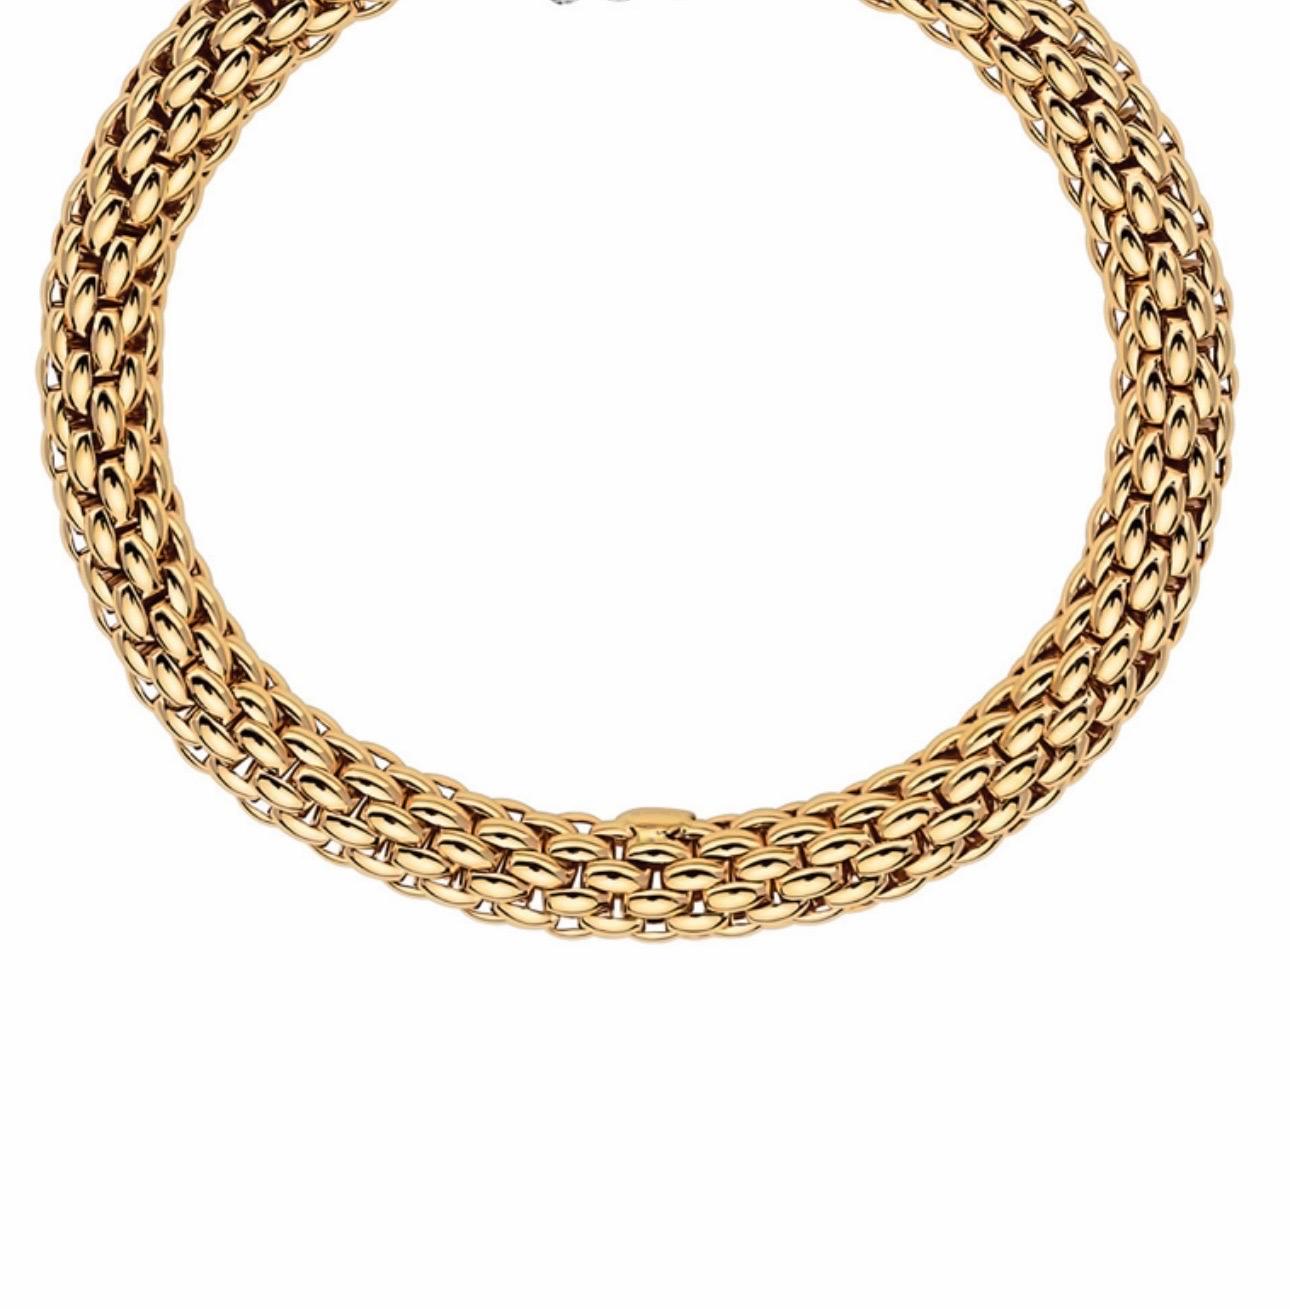 From Fope, this magnificent bracelet is part of the Love Nest collection. Strands of 18kt yellow gold are woven to produce a thick bracelet , and two rondels of smooth 18kt yellow gold  This Fope bracelet is a fabulous accent piece for any